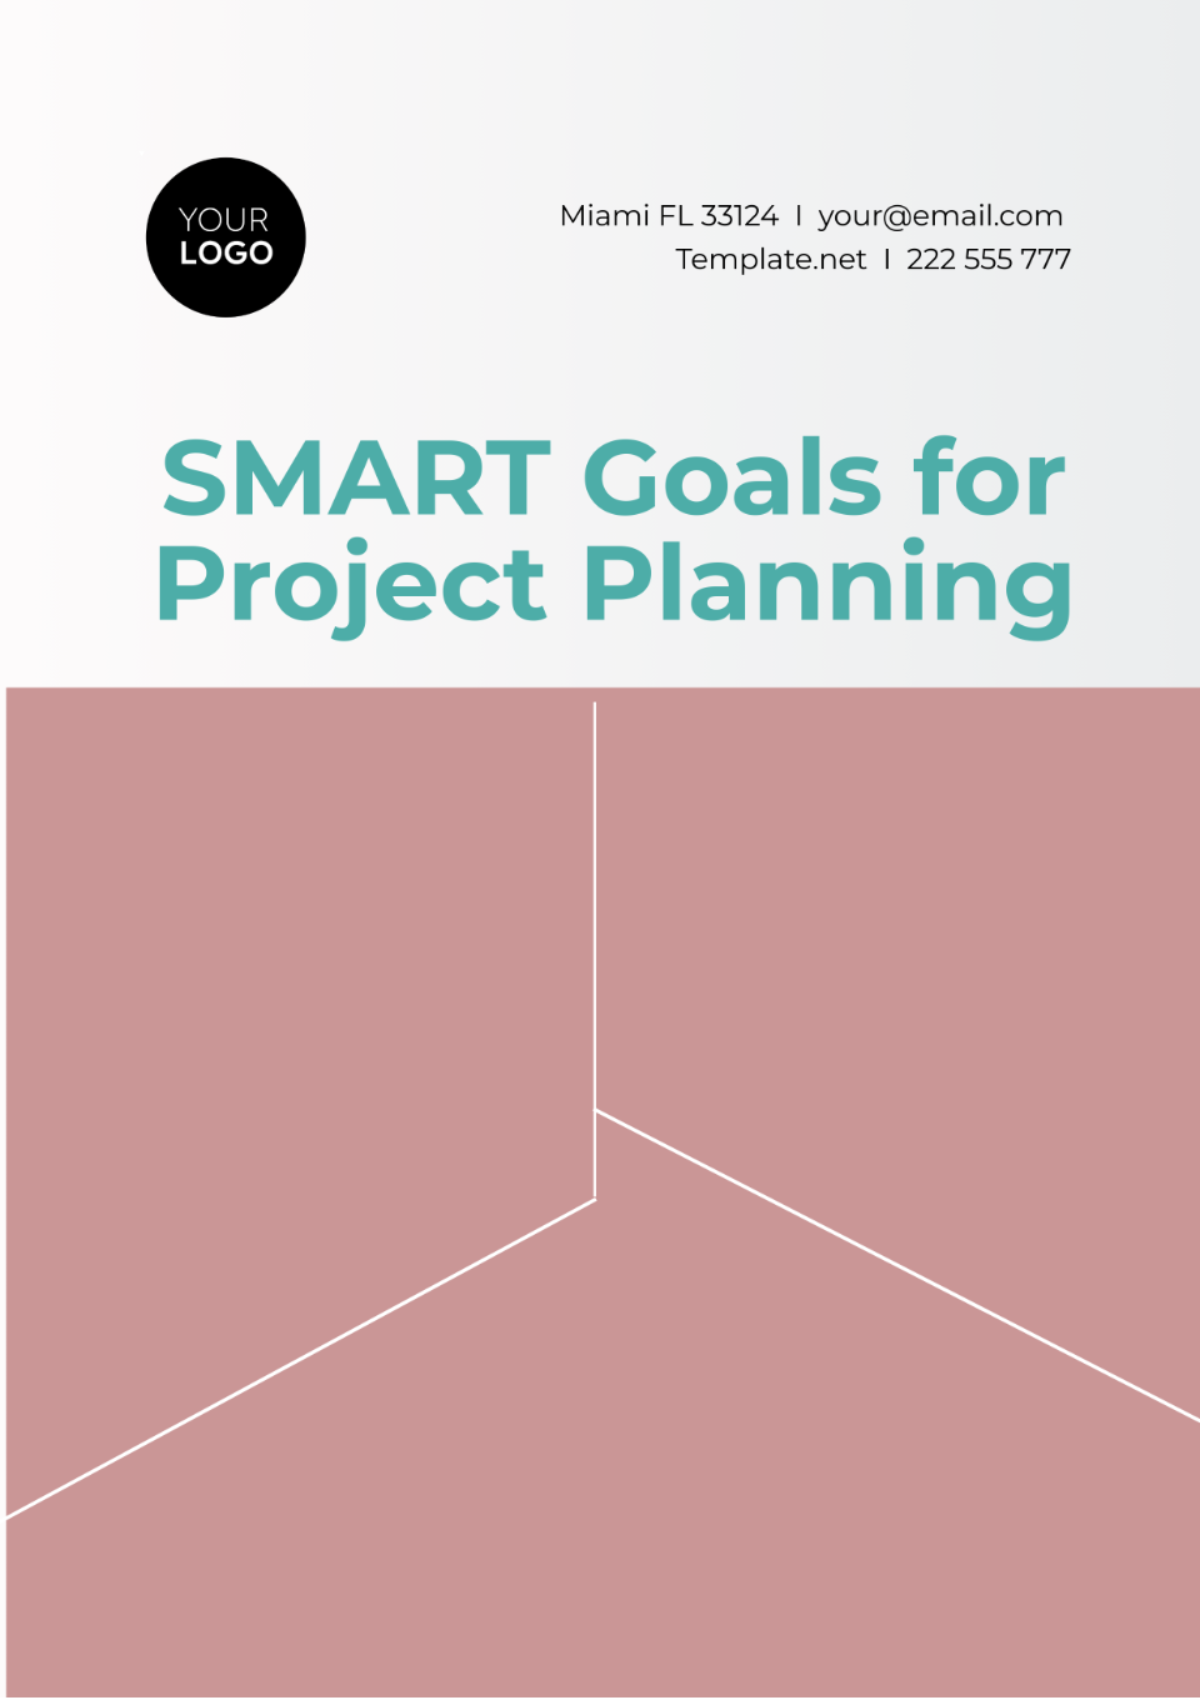 SMART Goals Template for Project Planning